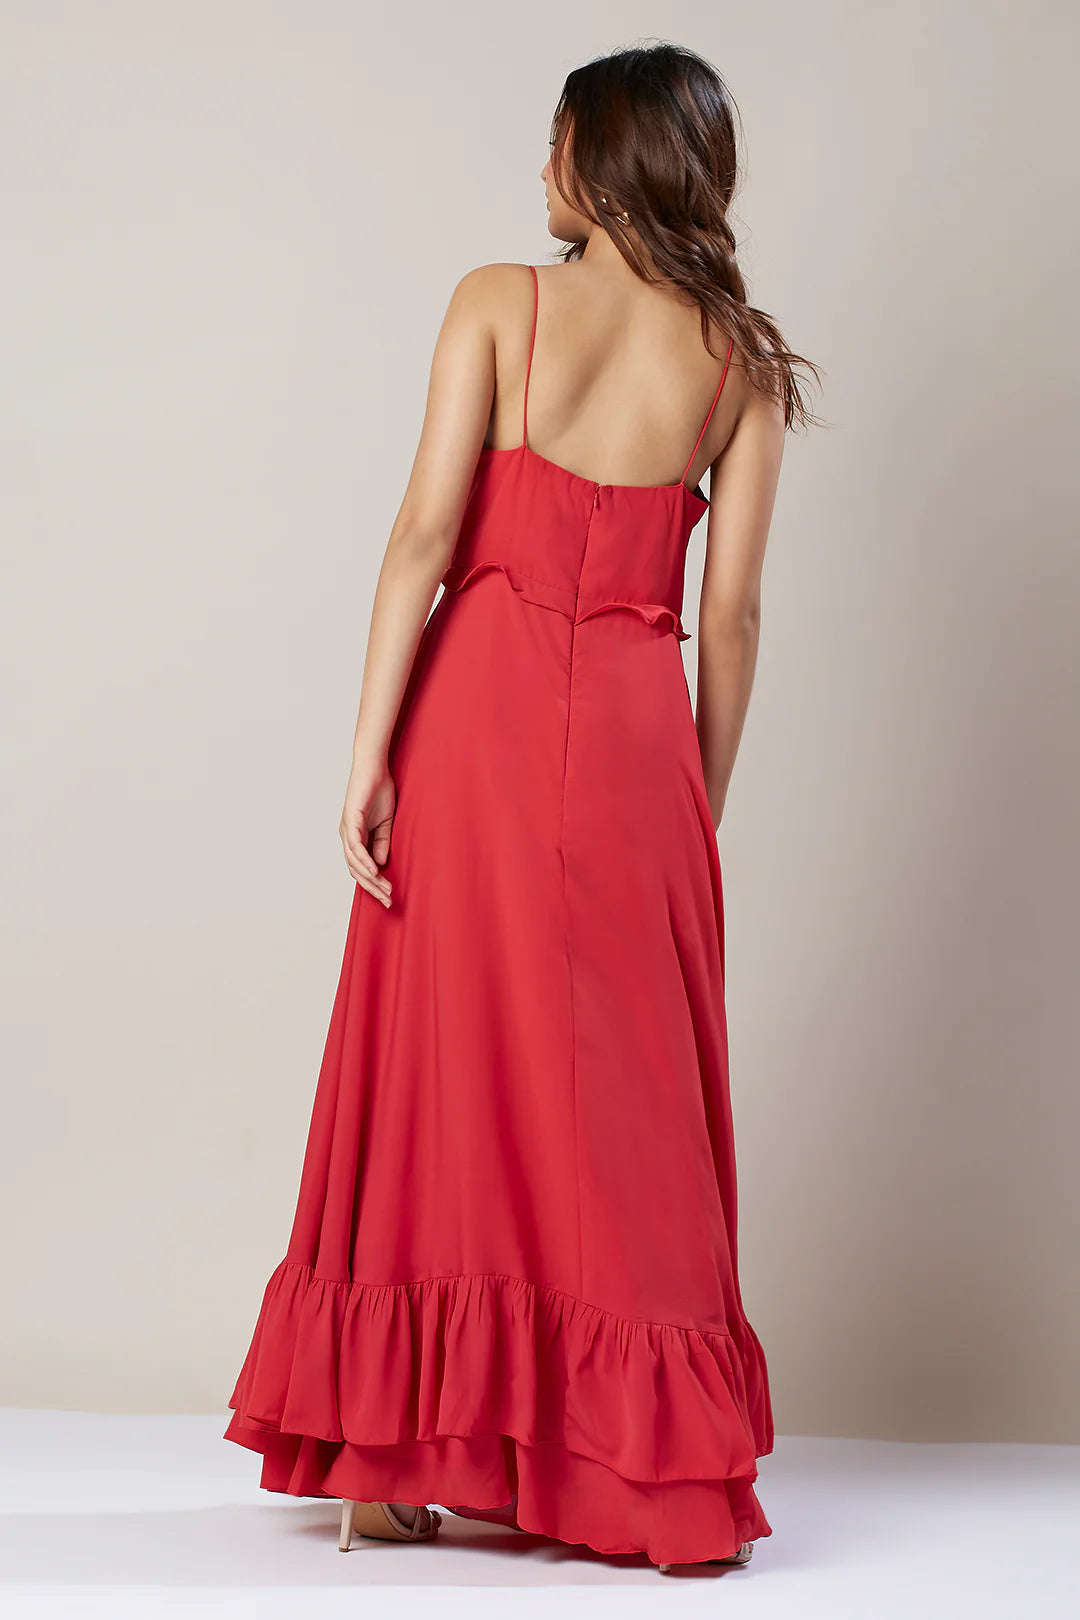 Image of Gorgeous and modern, this STRAPPY RED DRESS EMBELLISHED WITH RUFFLES is a must-have for any wardrobe. Crafted from quality crepe fabric and featuring ruffle detailing, this dress is designed to provide a timeless and elegant look. It's perfect for any occasion! From savoirfashions.com